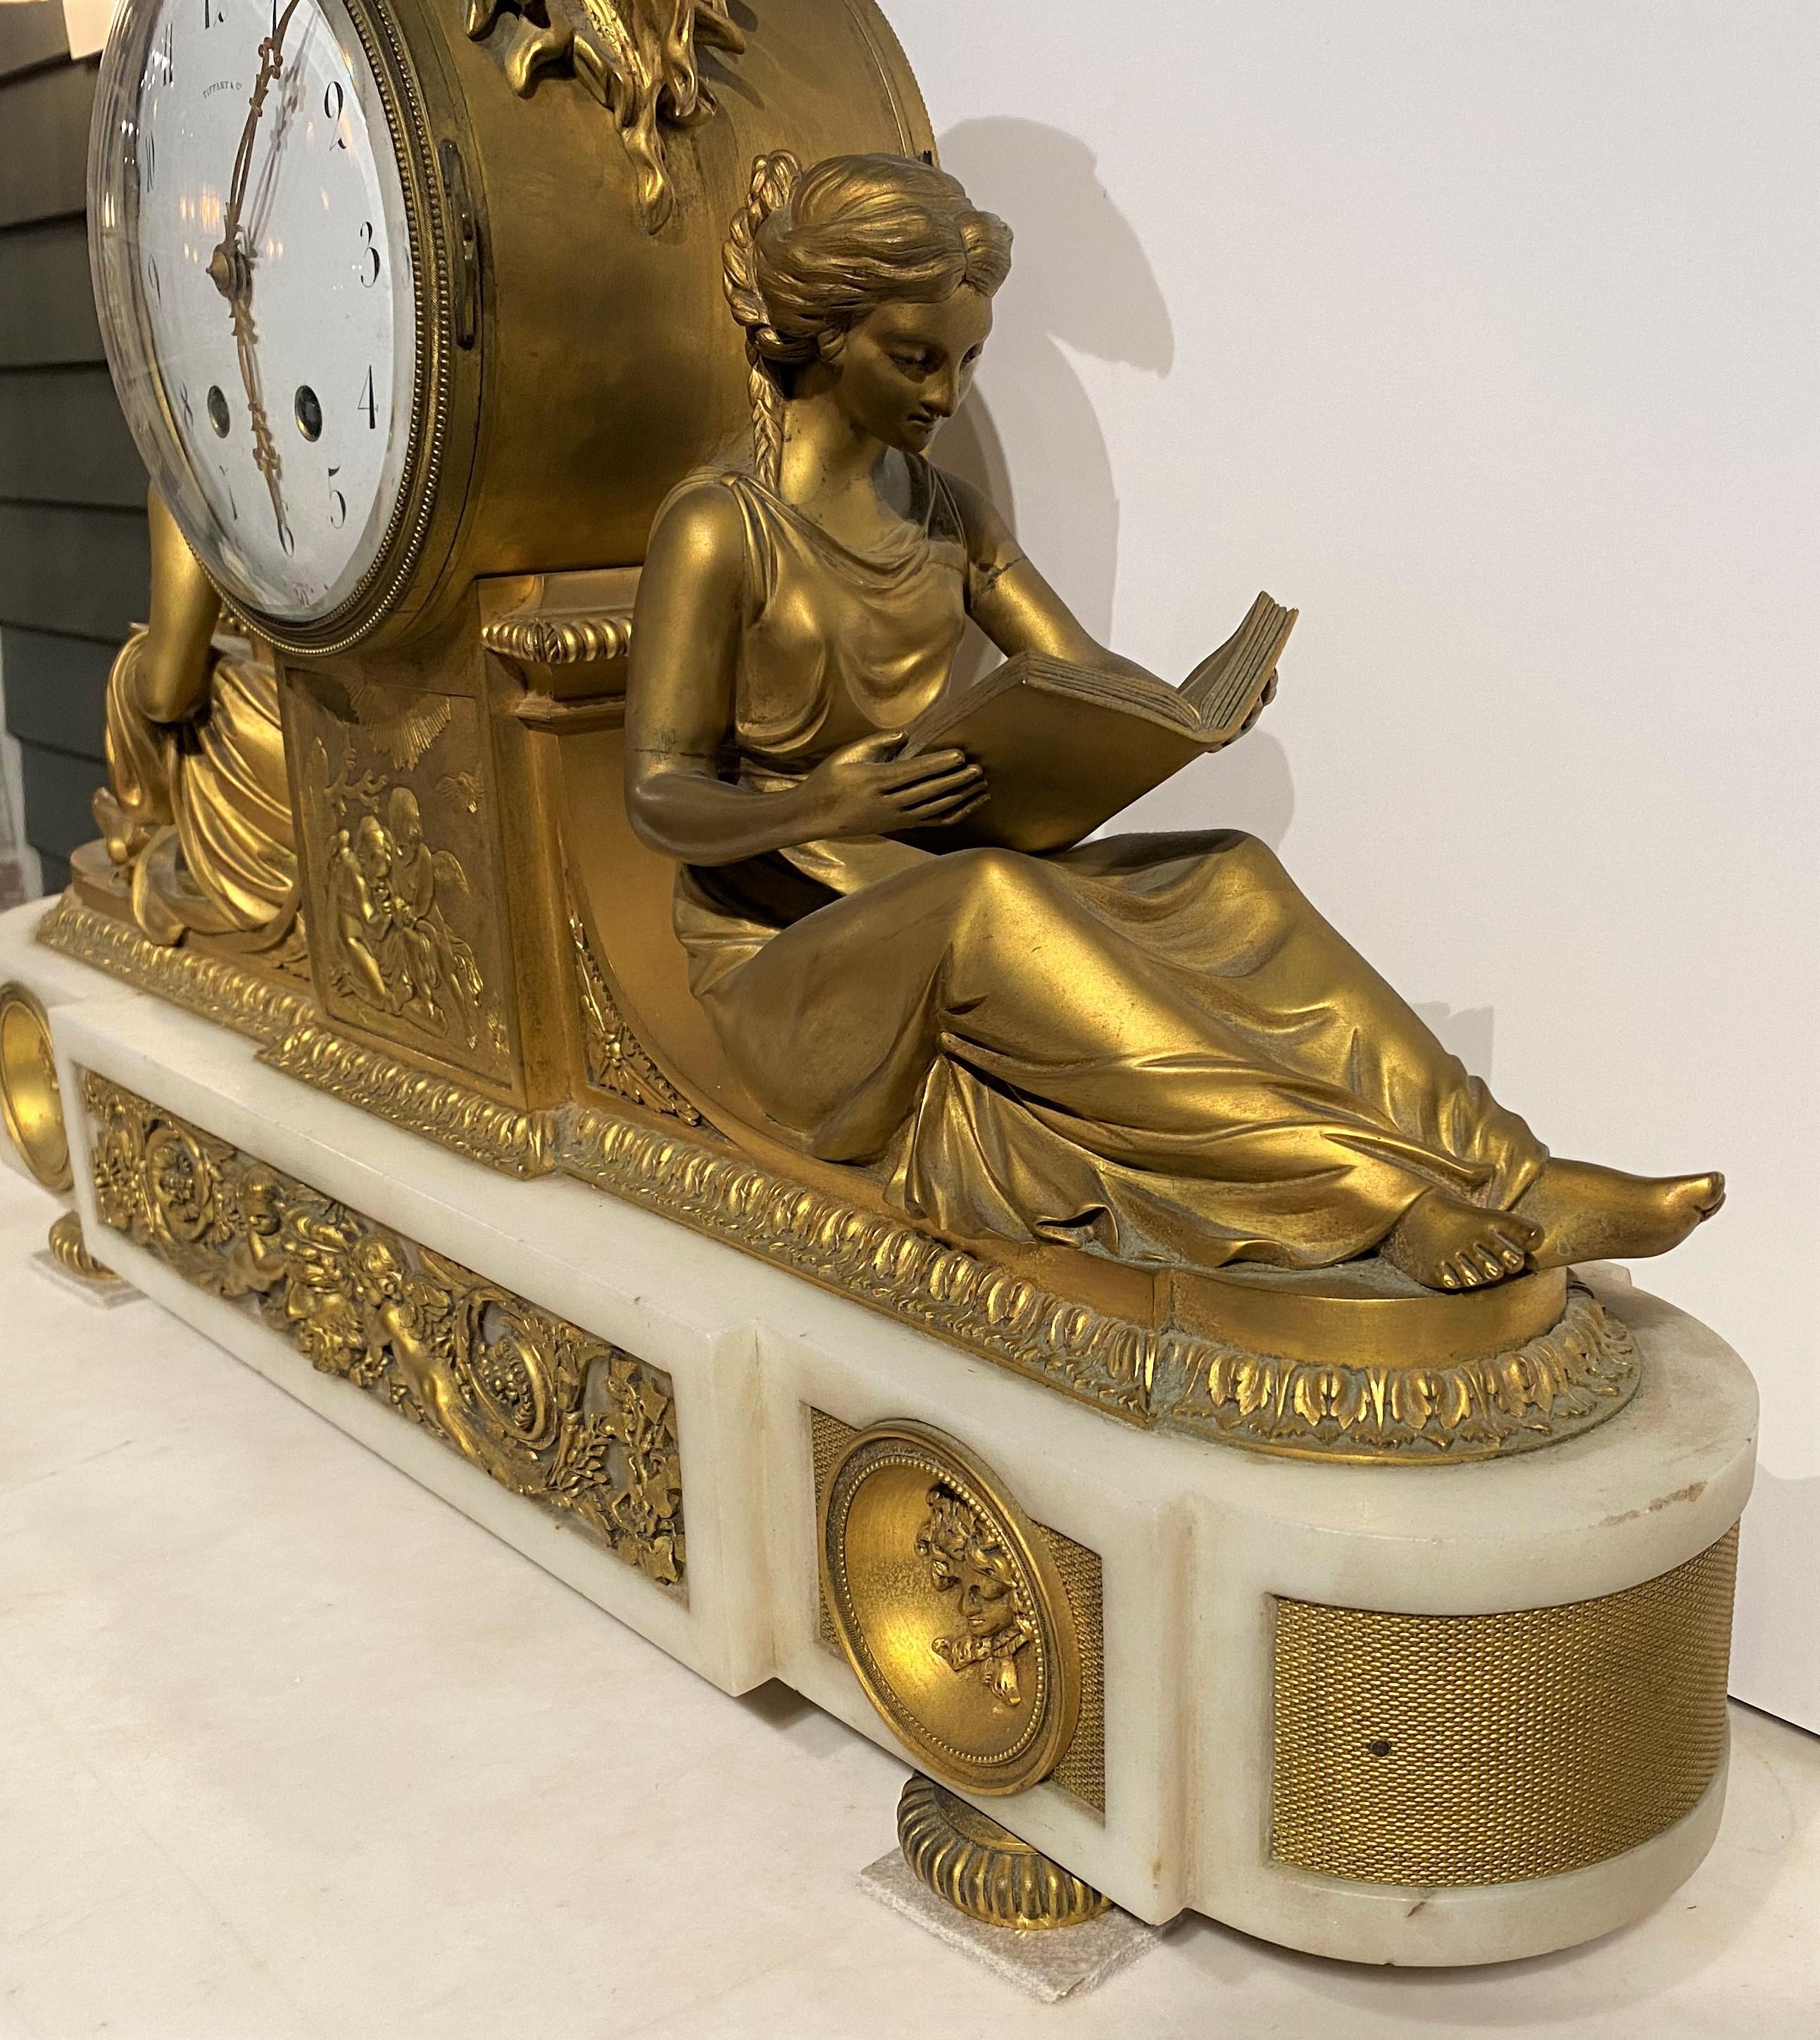 An exceptional French gilt bronze mantel clock marketed by Tiffany & Co, with classical cast gilt figures of a boy and girl reading on each side of the clock, a central raised panel with cherubs below the enameled dial, applied ormolu with faces and